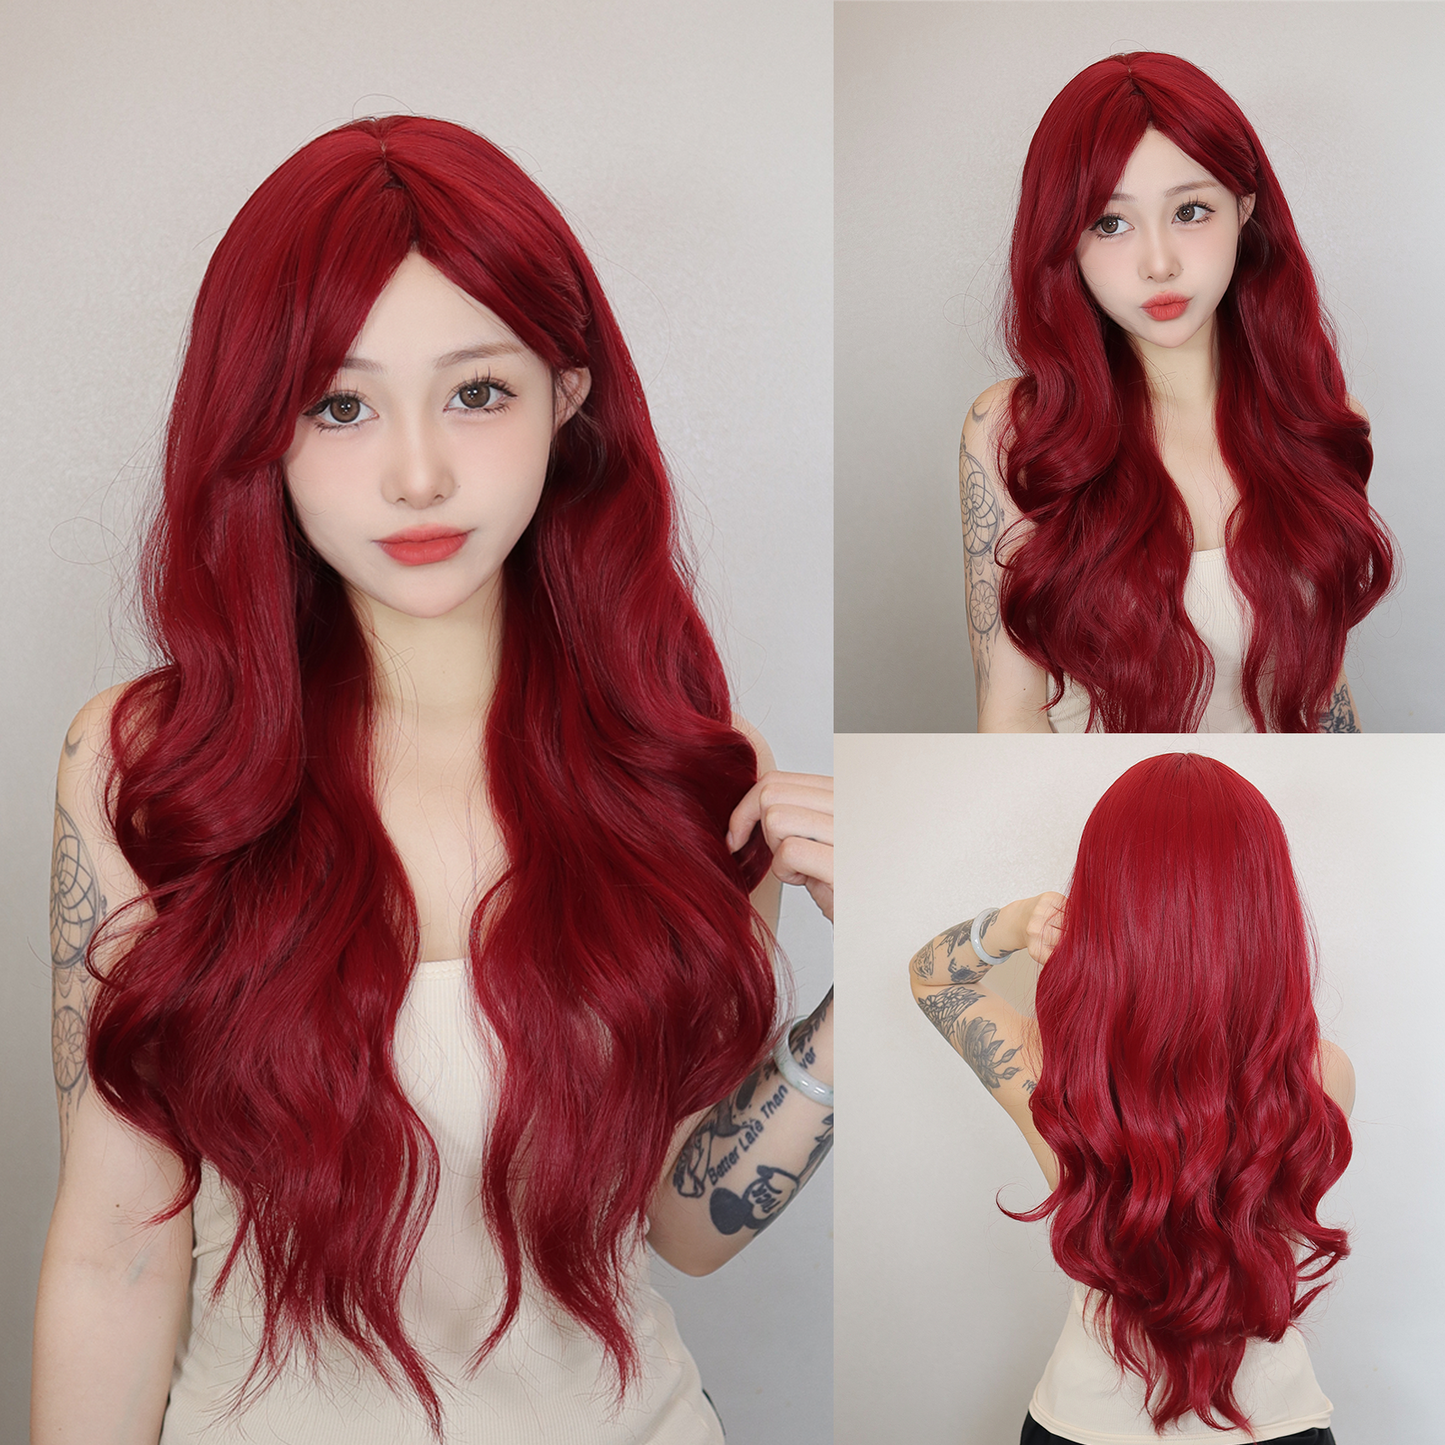 【TBianca】Loxology | 26 Inches Long Curly Wine Red Wigs with Bangs Synthetic Wigs